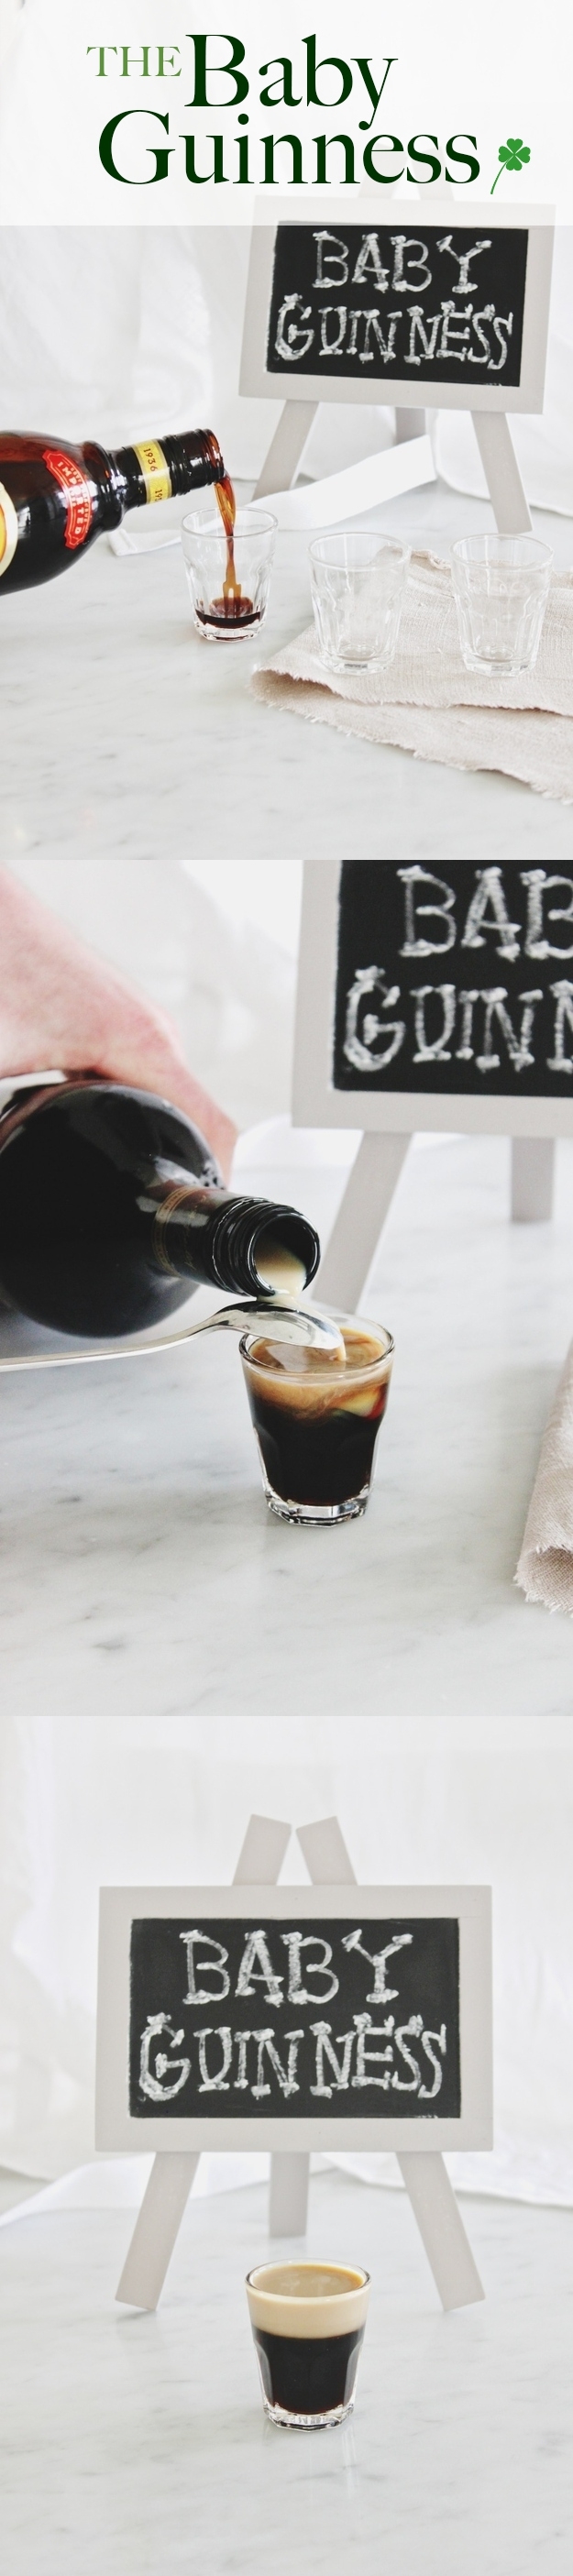 3 Delicious Drinks For St. Patrick's Day